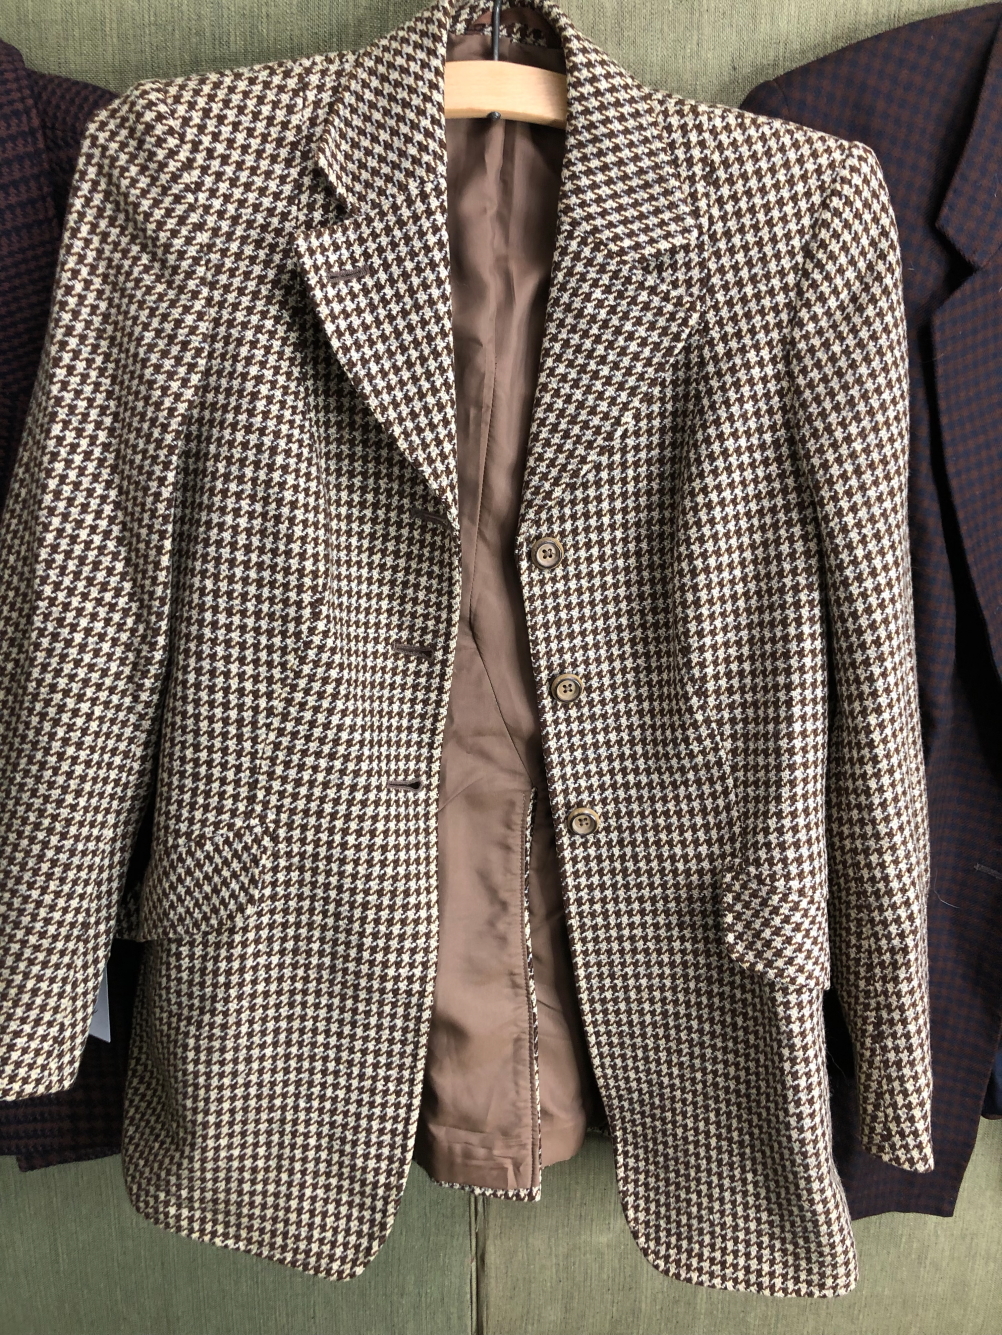 JACKET. HARRY HALL, MADE IN ENGLAND 100% WOOL AND LINED CHECK JACKET PIT TO PIT 43cms, SHOULDER TO - Image 2 of 11